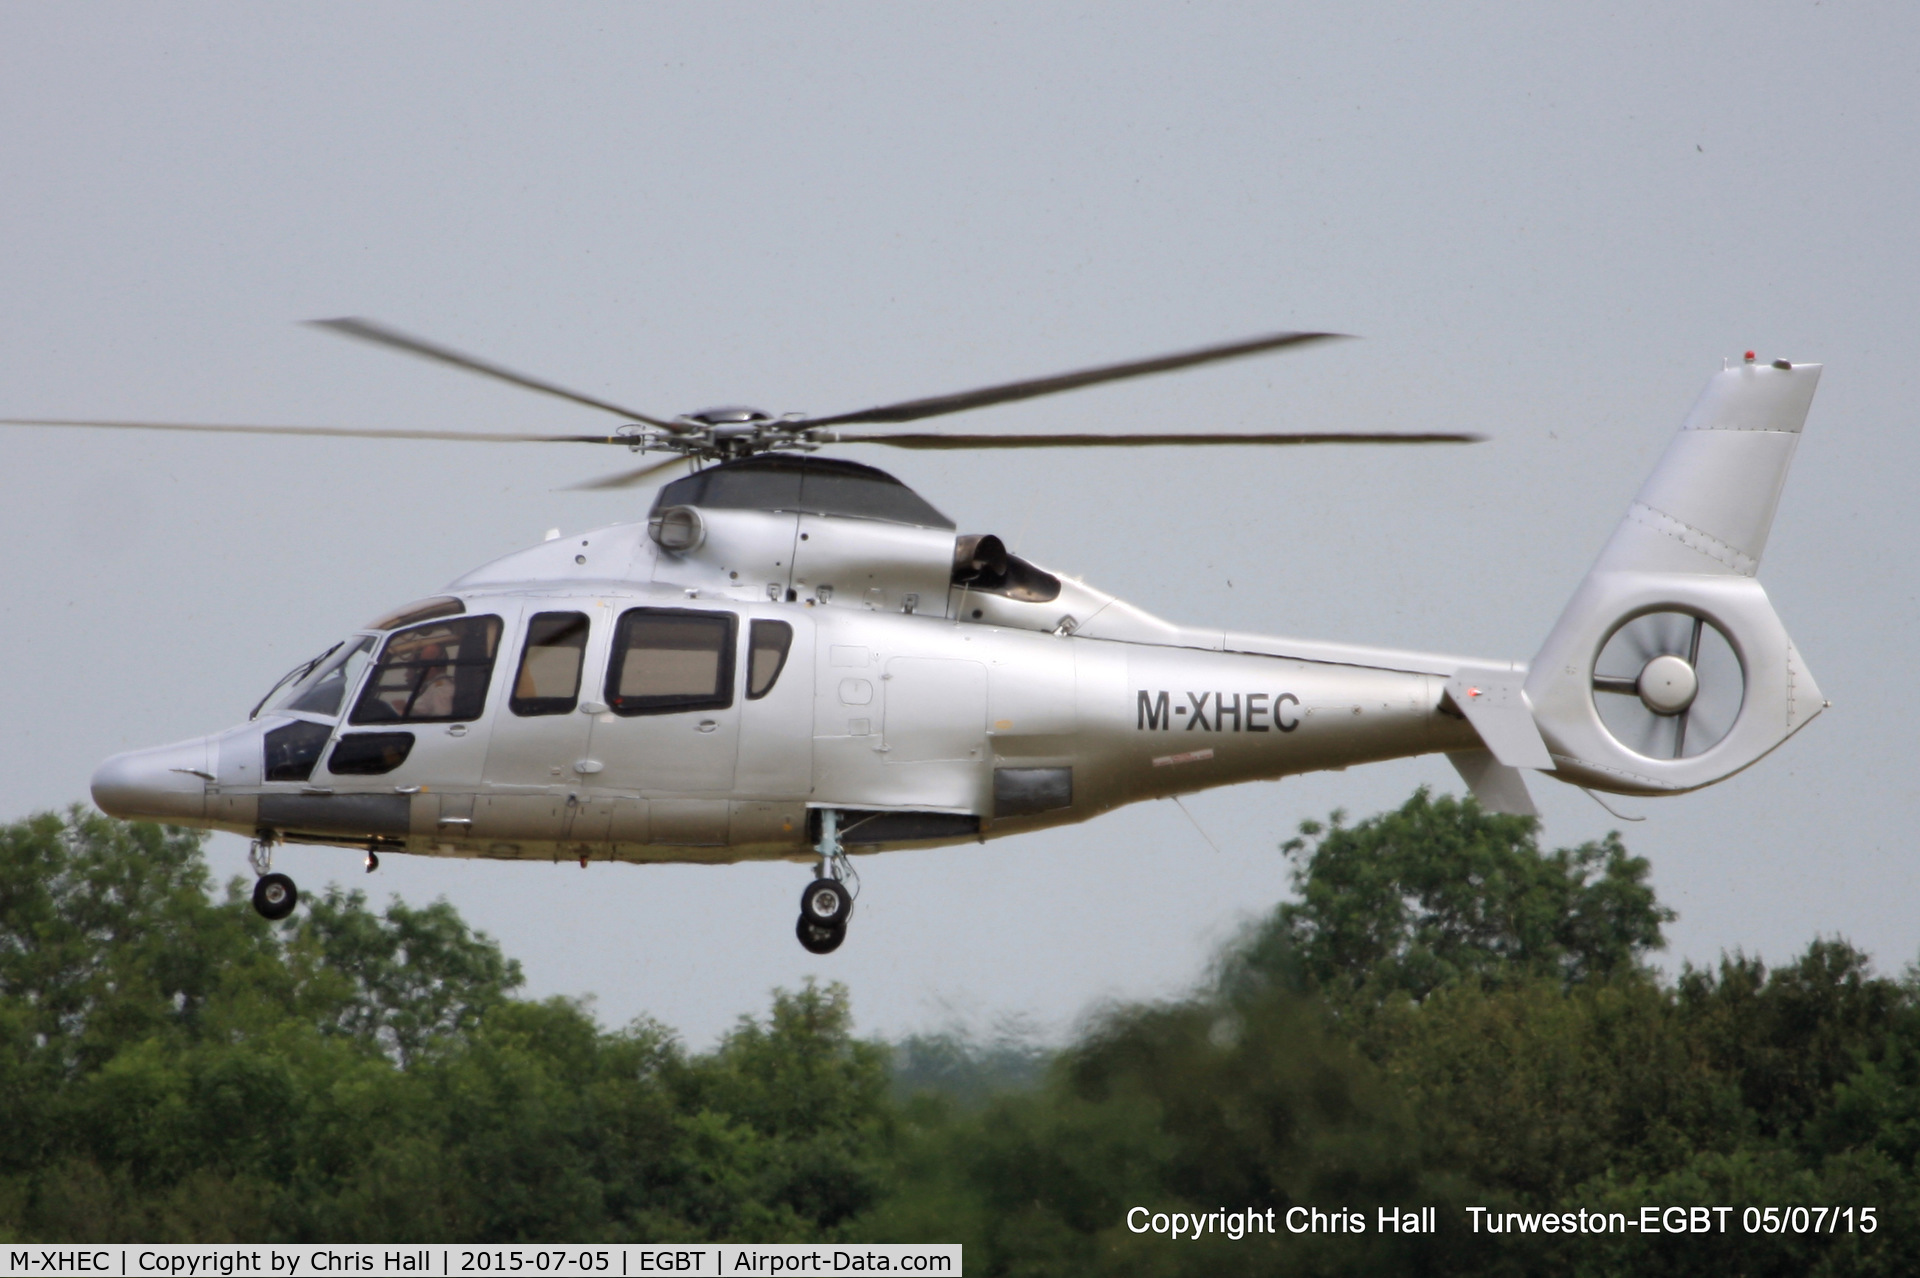 M-XHEC, Eurocopter EC-155B C/N 6600, ferrying race fans to the British F1 Grand Prix at Silverstone